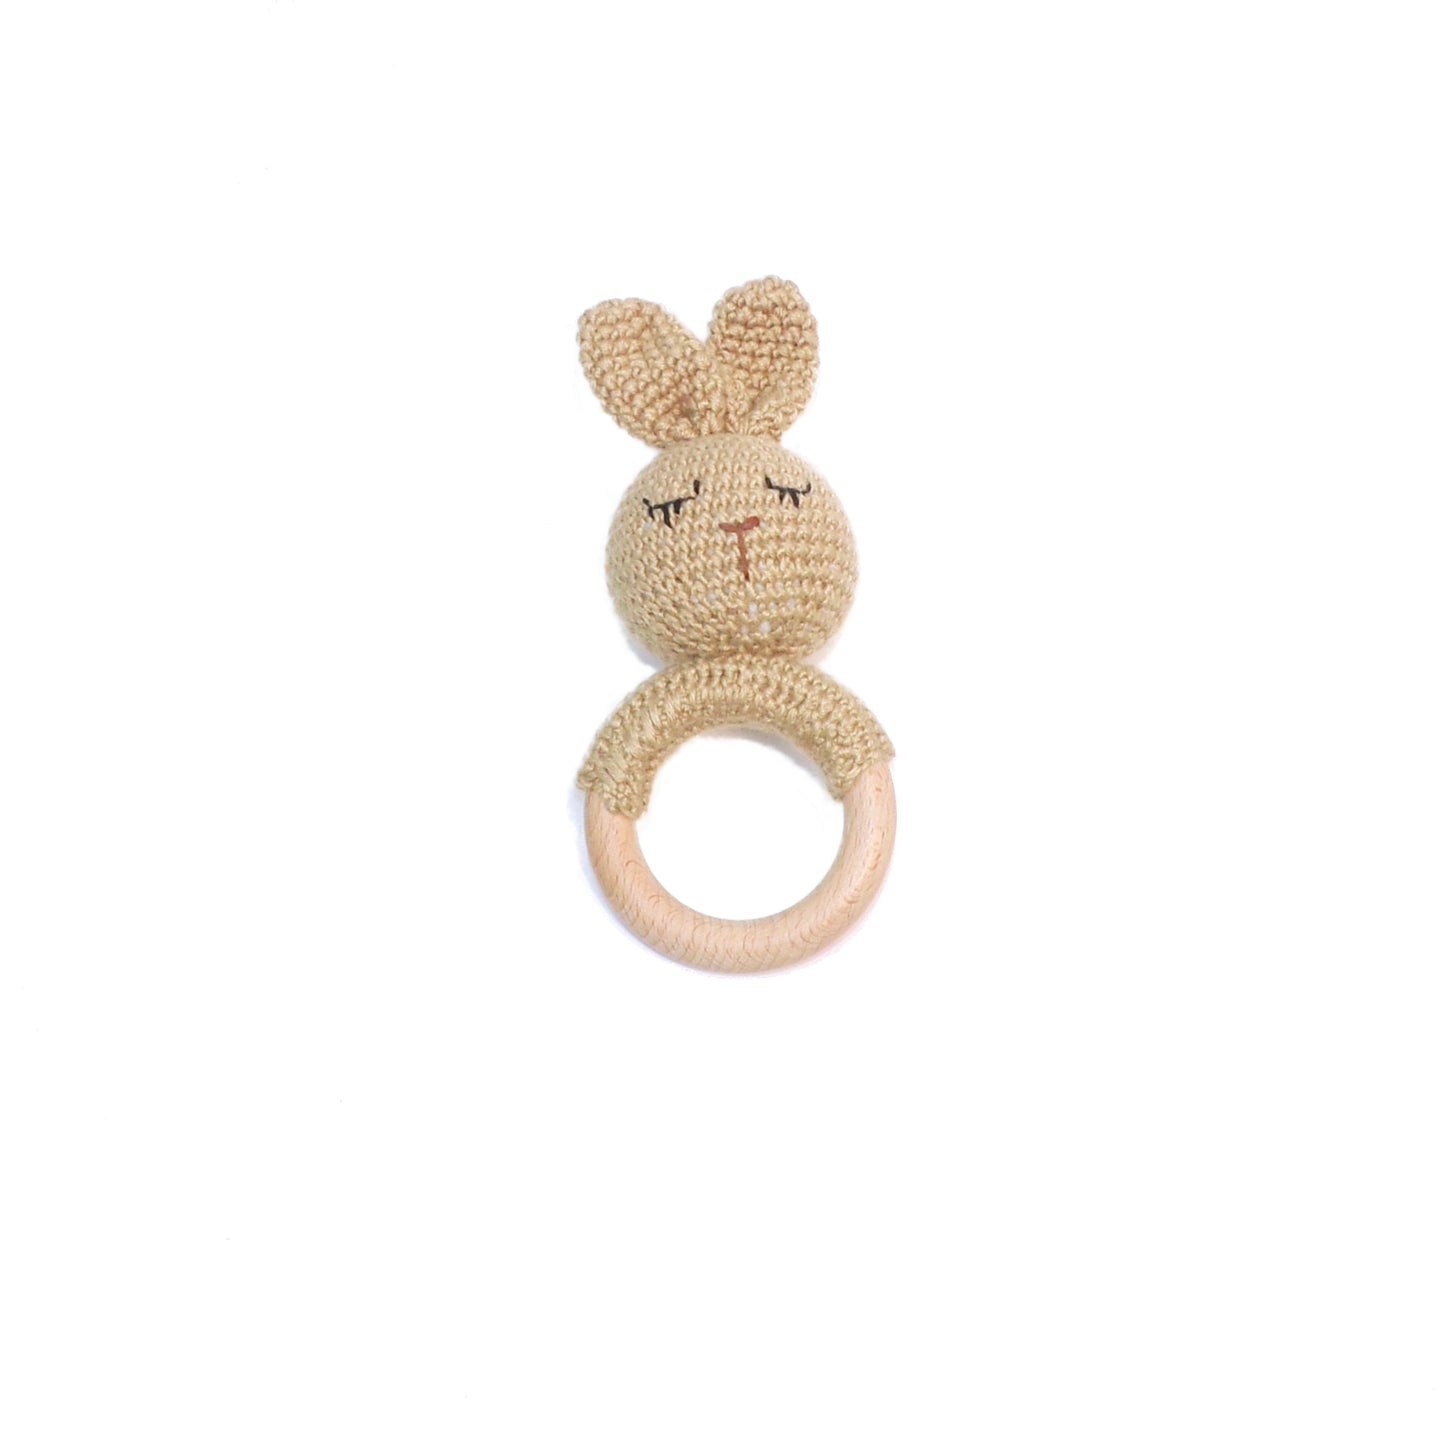 Baby rattle in a rabbit design, made from wool and bamboo.